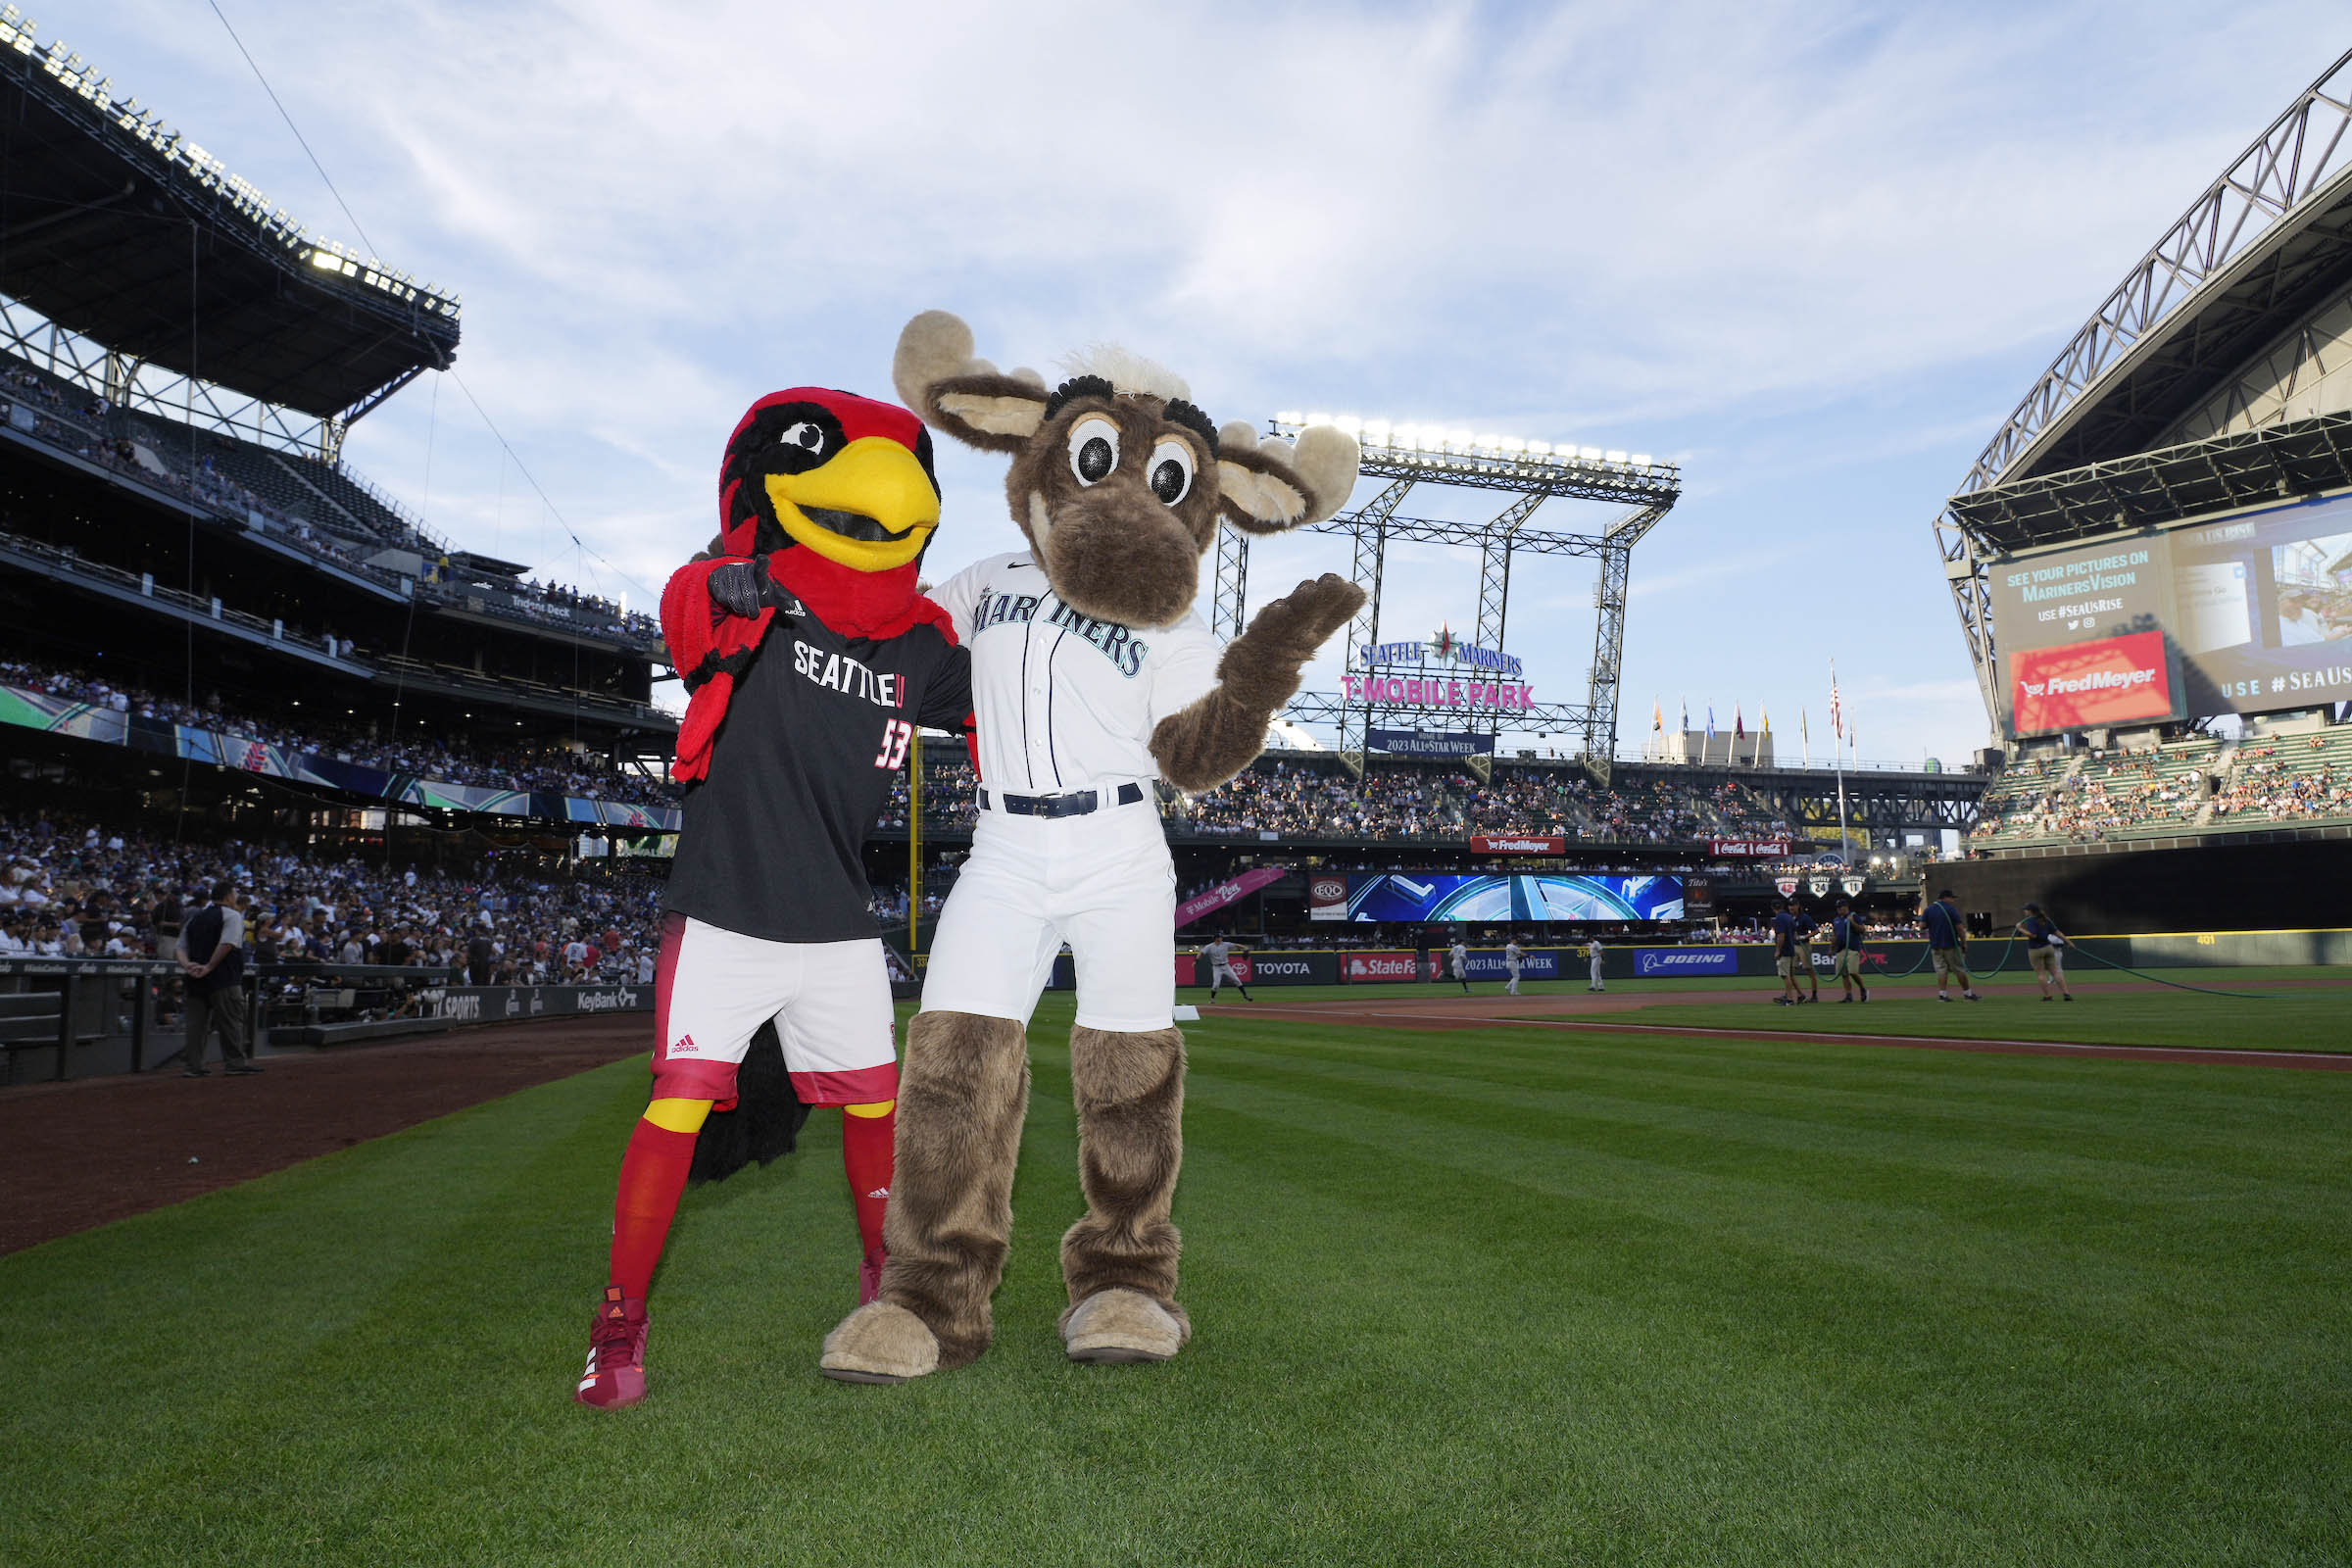 Rudy the Redhawk spent some time hanging with the Mariners Moose.